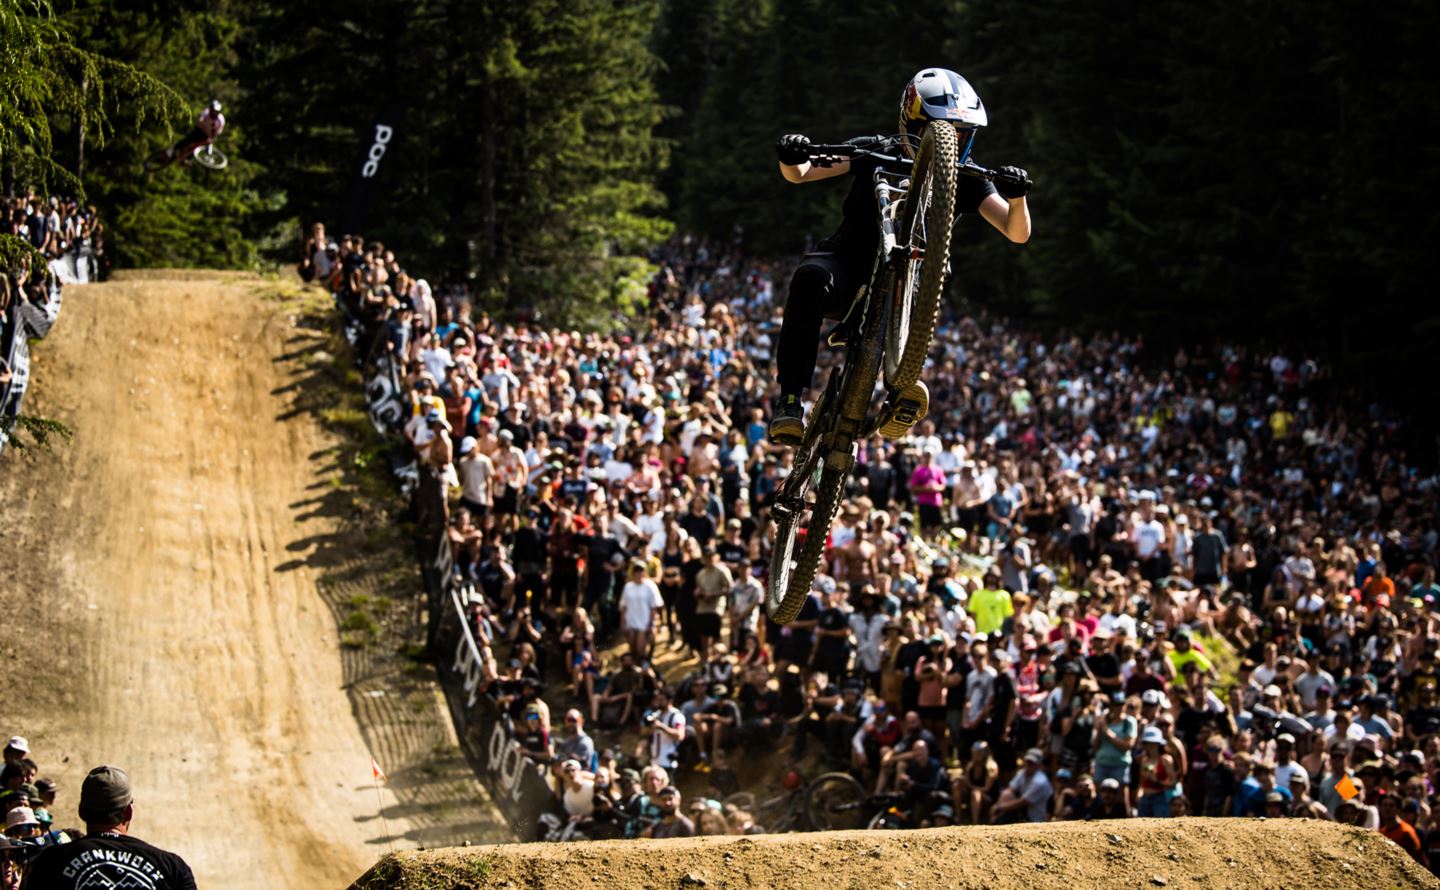 Gracy Hemsteet in front of a crowd at Crankworx Whistler 2022